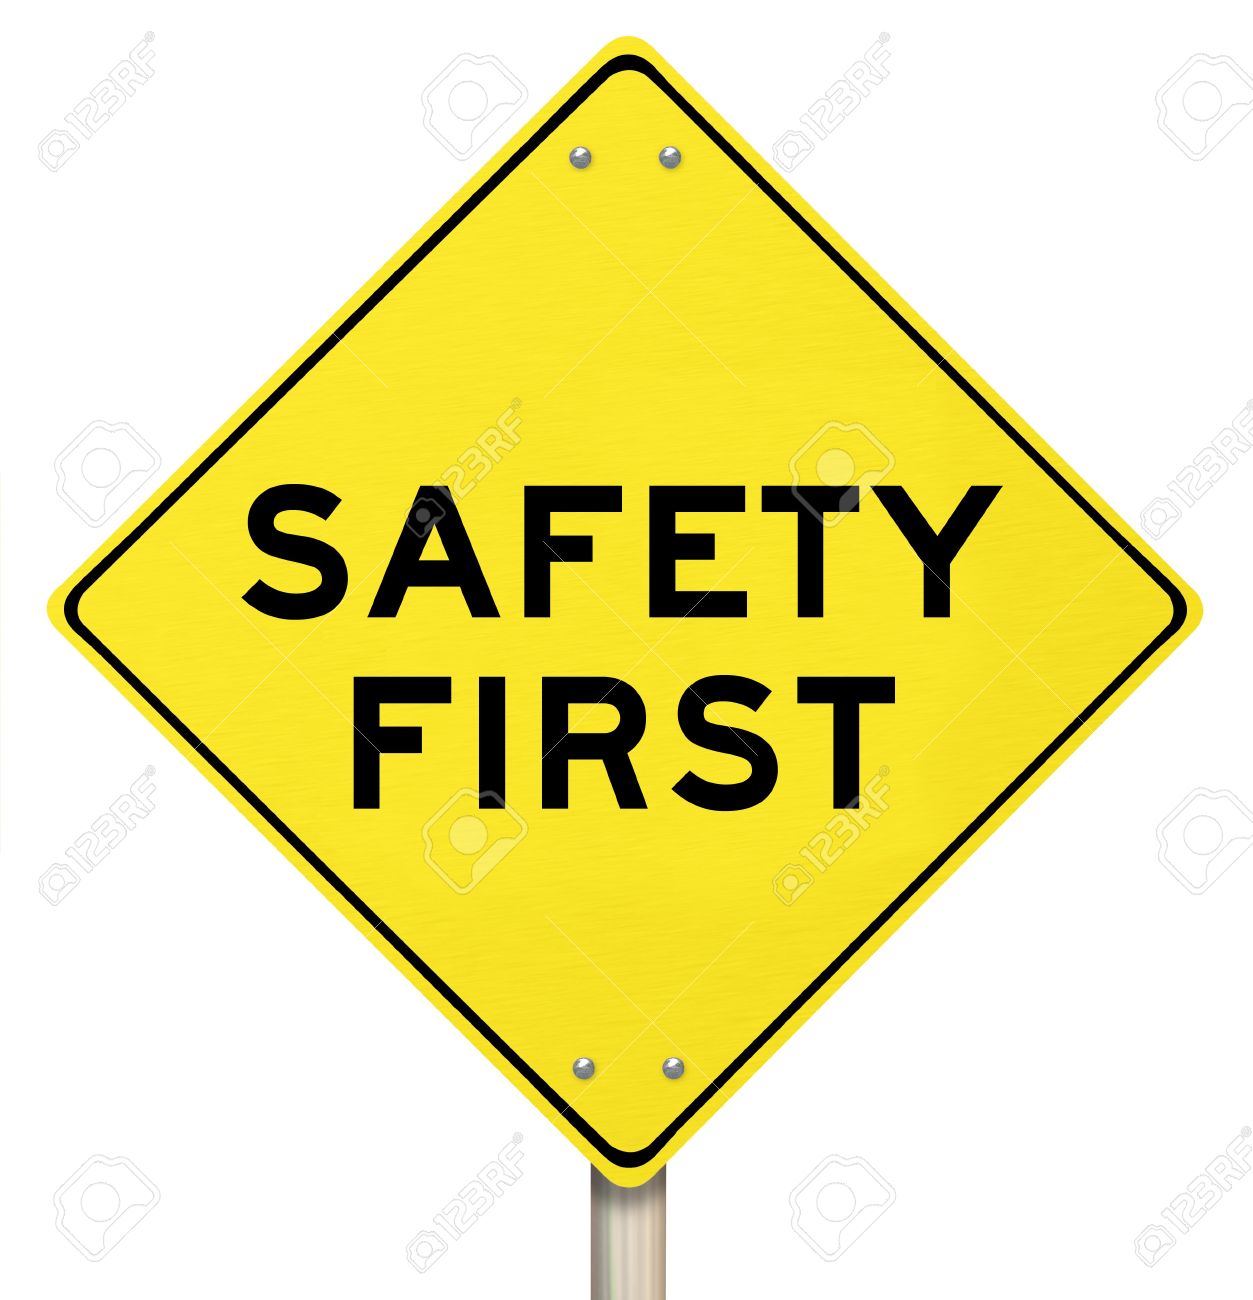 A yellow diamond-shaped road sign cautions Safety First Stock Photo -  17944291